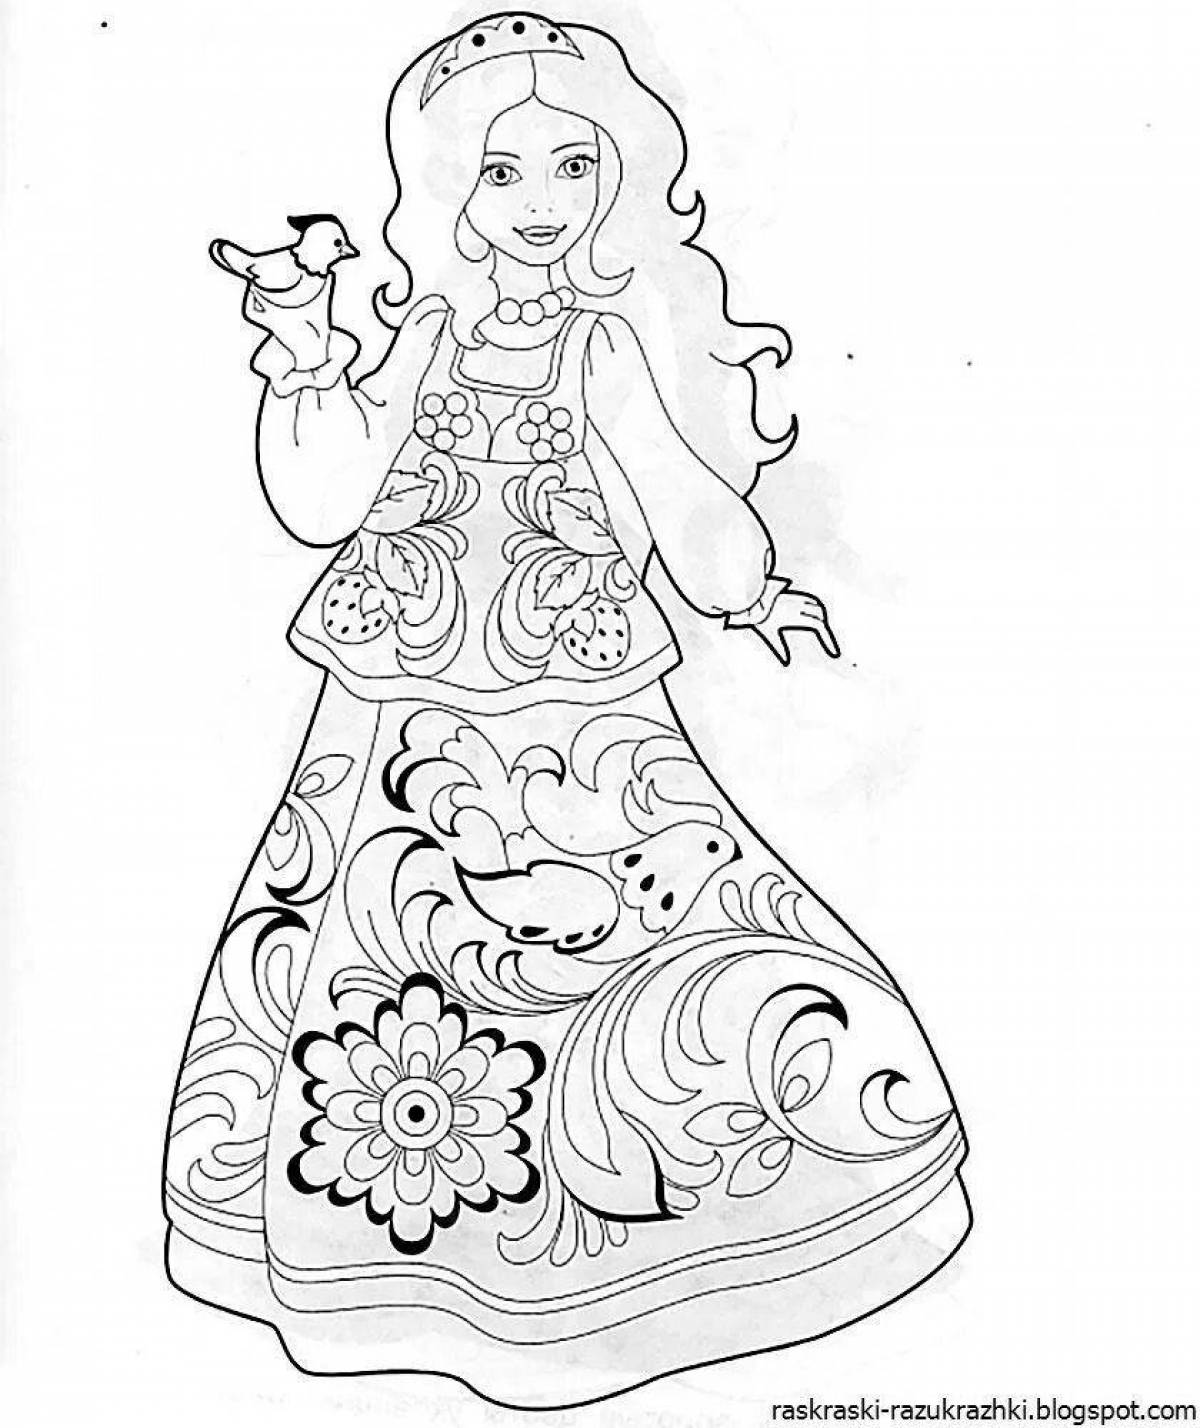 Delightful coloring pages of Russian folk costumes for children